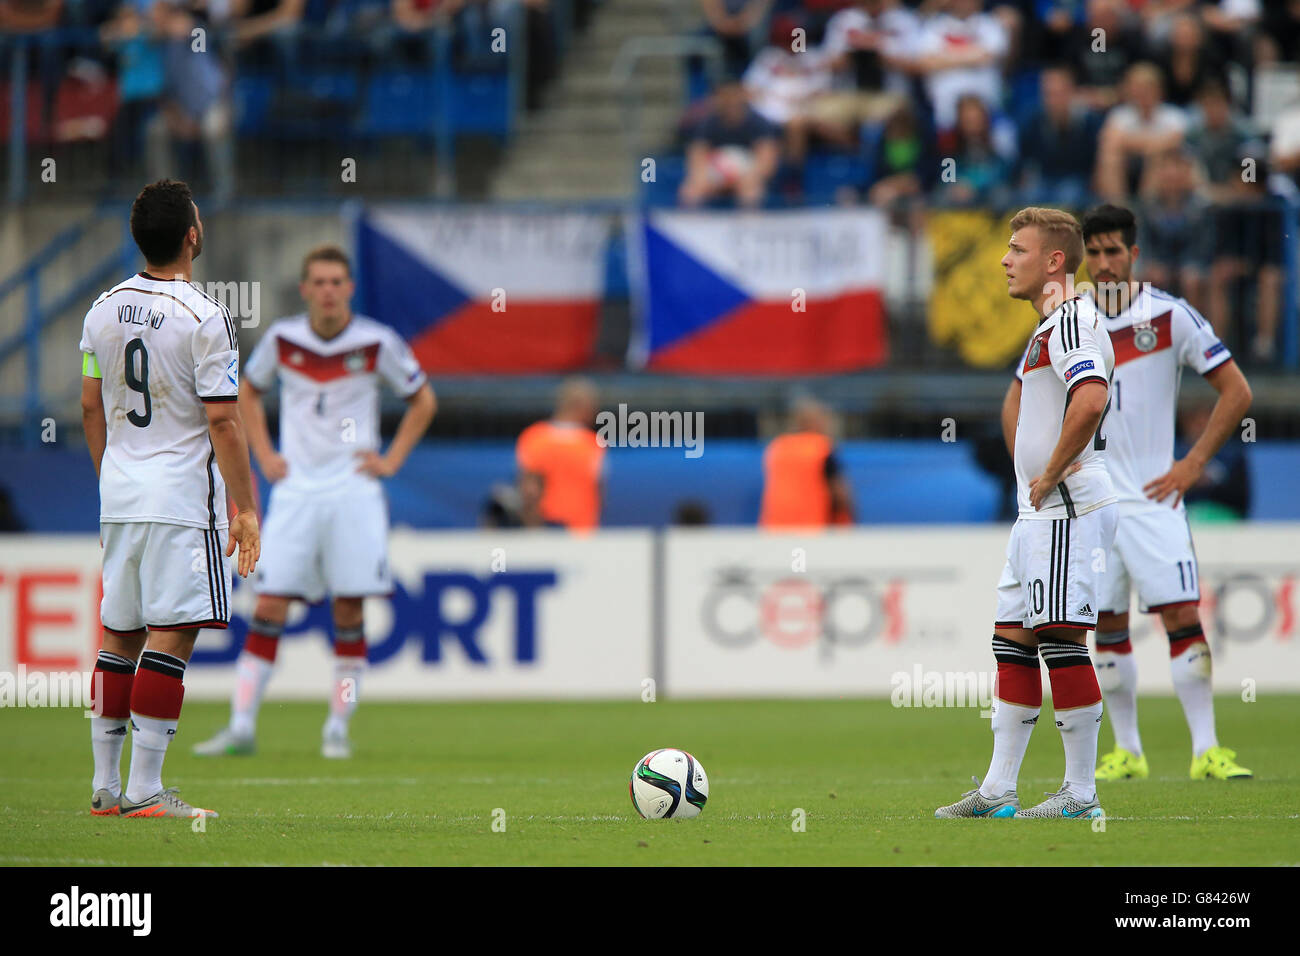 Soccer - UEFA European Under-21 Championship - Semi Final - Portugal v Germany - Andruv Stadium. Germany's Kevin Volland (left) and Maximilian Meyer (right) look dejected after seeing their side concede a fifth goal. Stock Photo